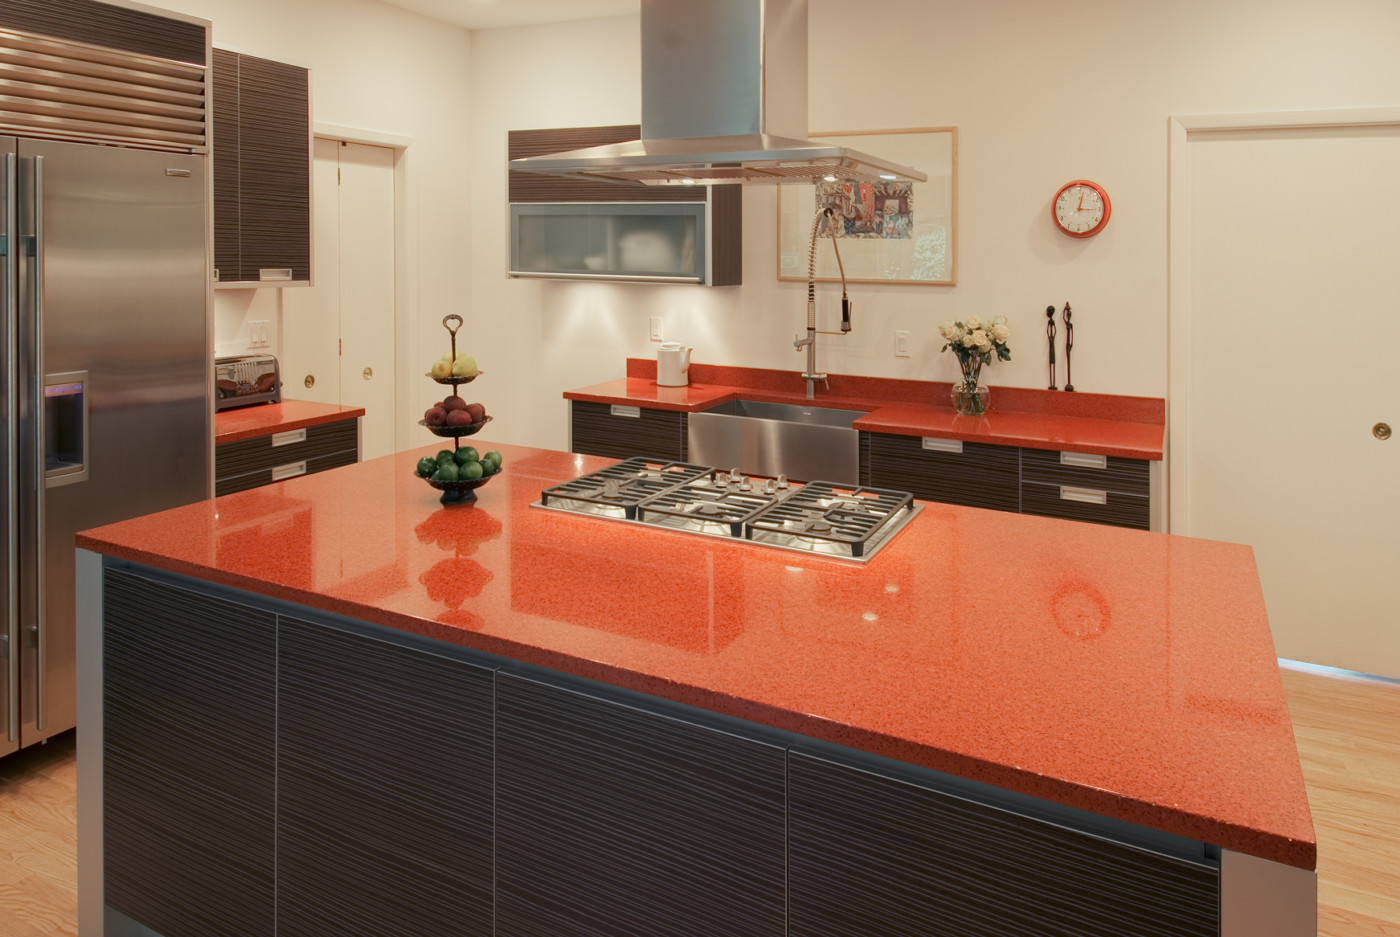 IceStone Moroccan Red recycled countertops in modern kitchen